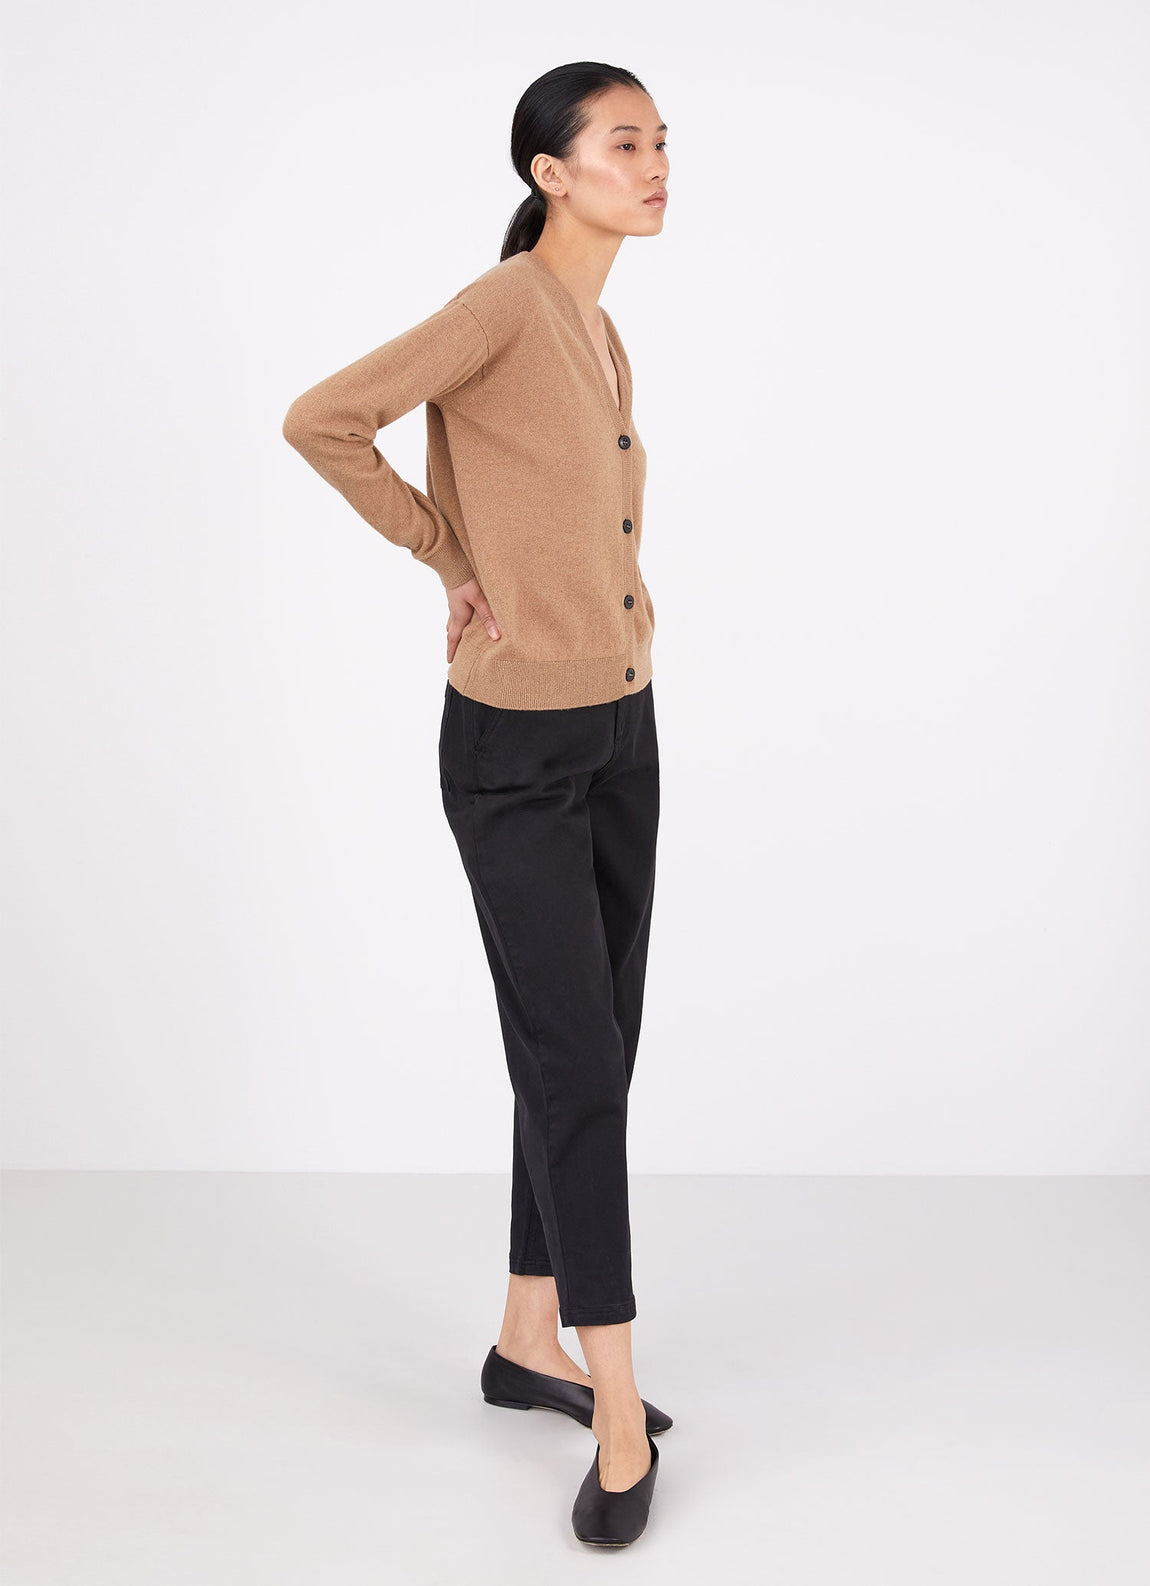 Women's Cashmere Boxy Cardigan in Camel